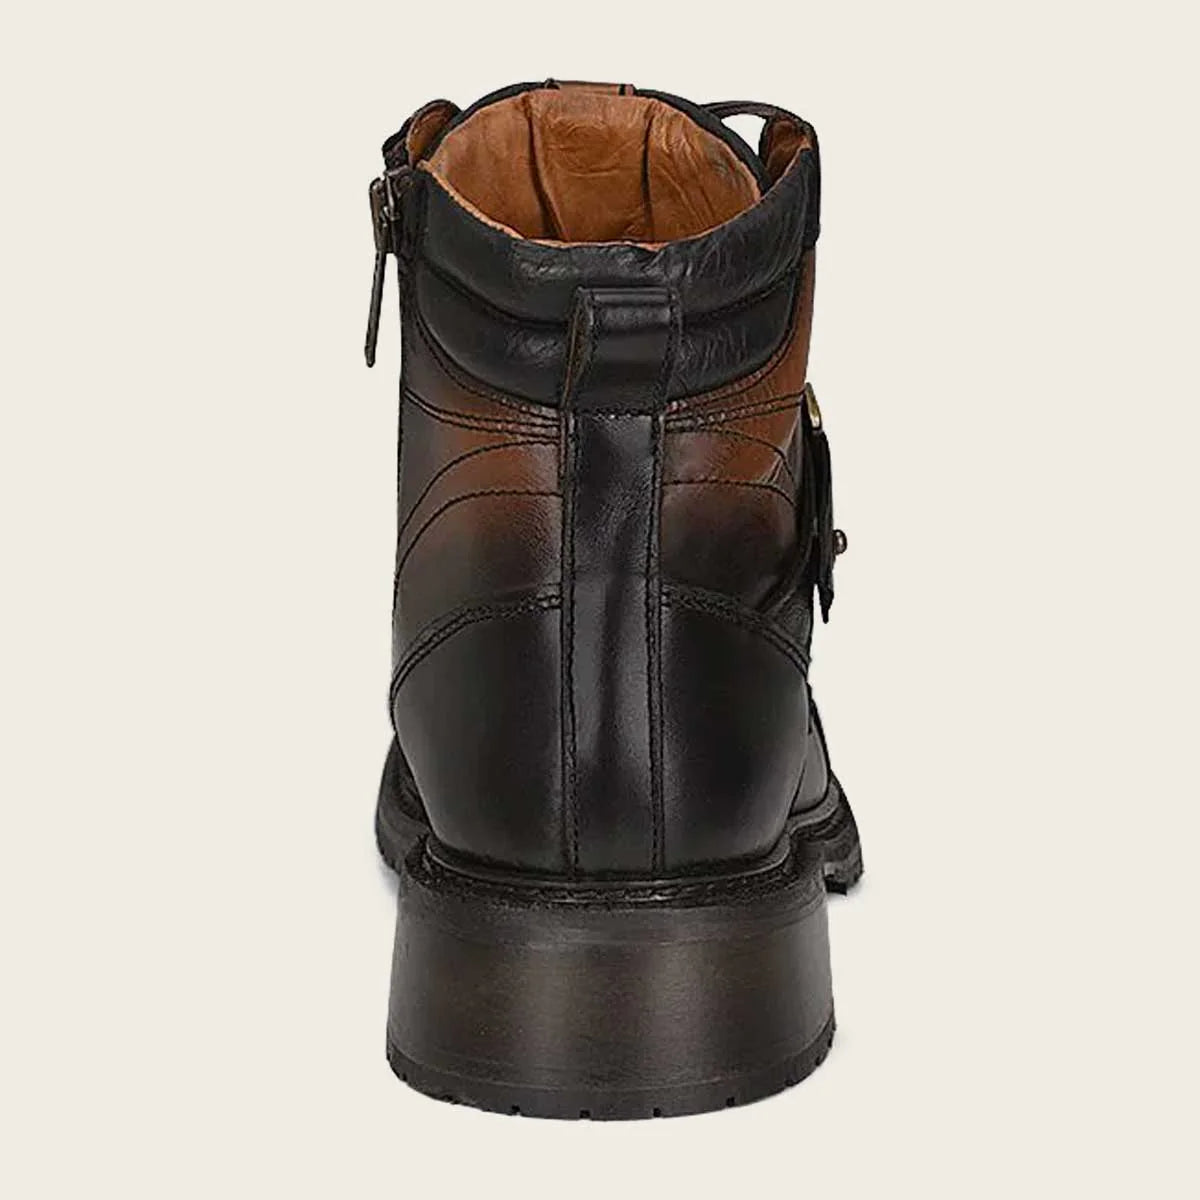 Cuadra brown ostrich leather urban ankle boots